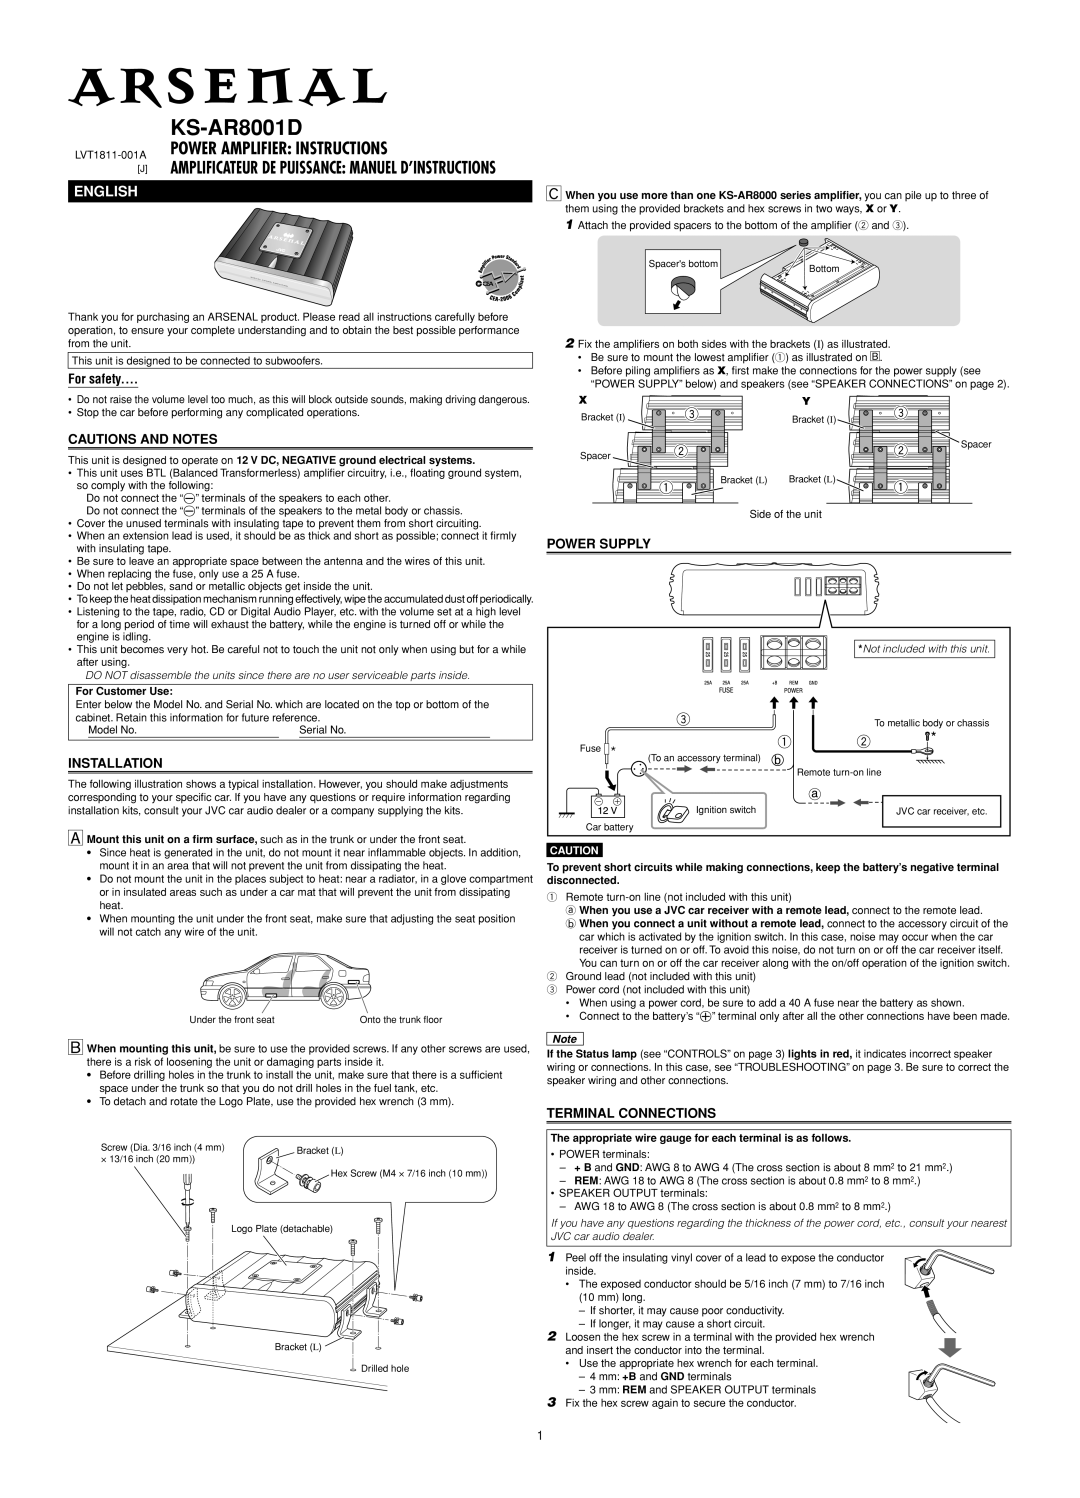 JVC KS-AR8001D user service LVT1811-001A POWER AMPLIFIER INSTRUCTIONS, English, For safety, Cautions And Notes 